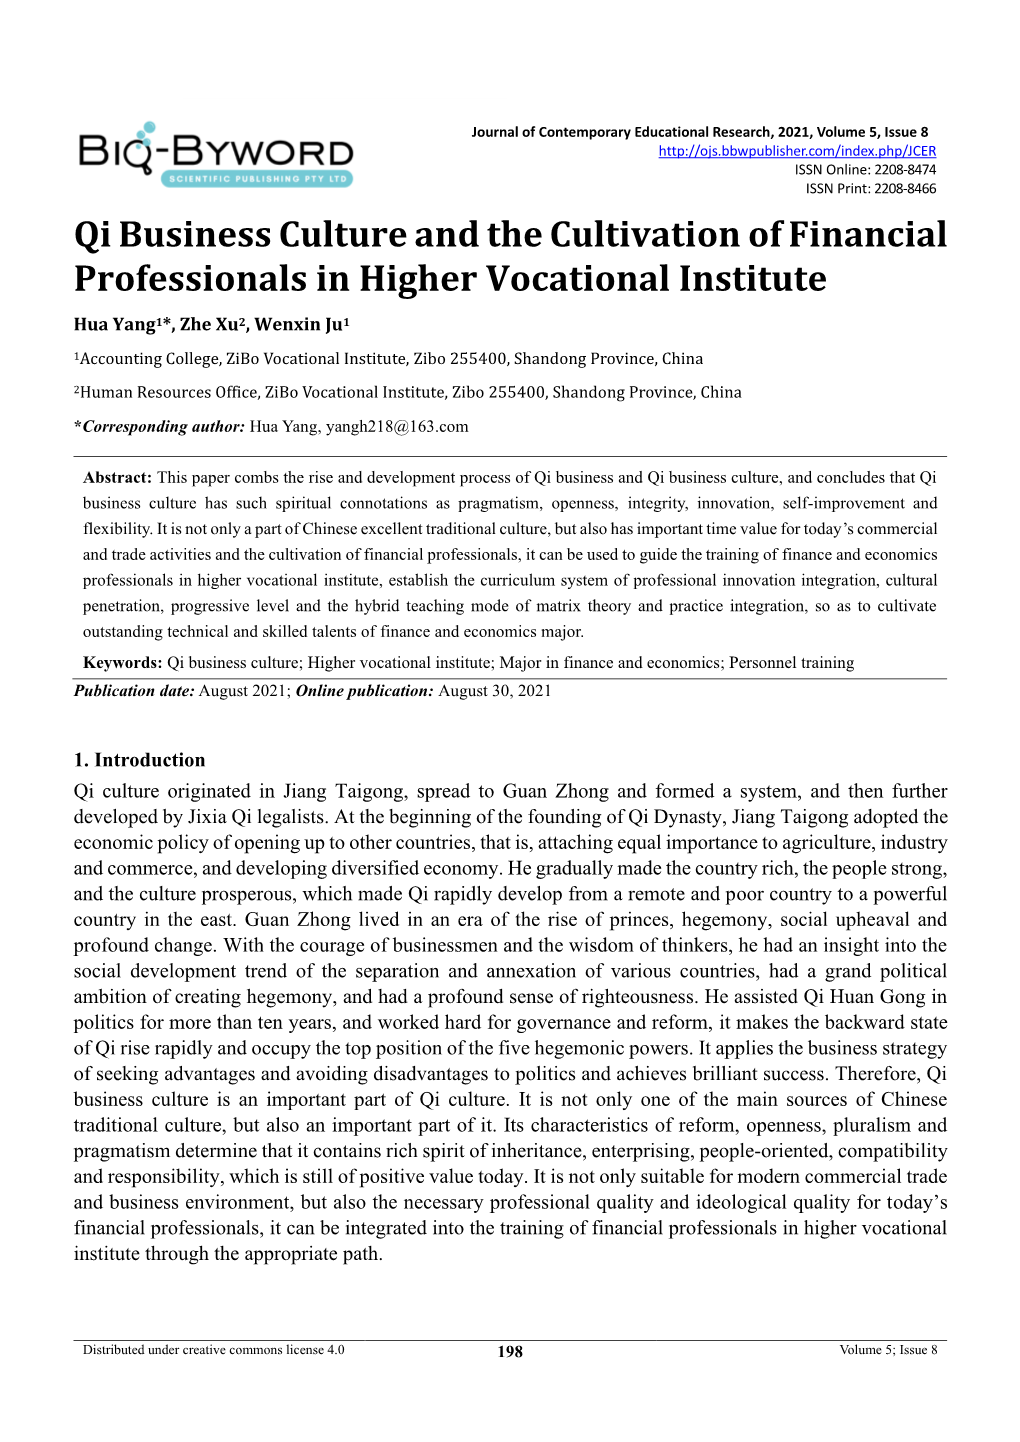 Qi Business Culture and the Cultivation of Financial Professionals in Higher Vocational Institute